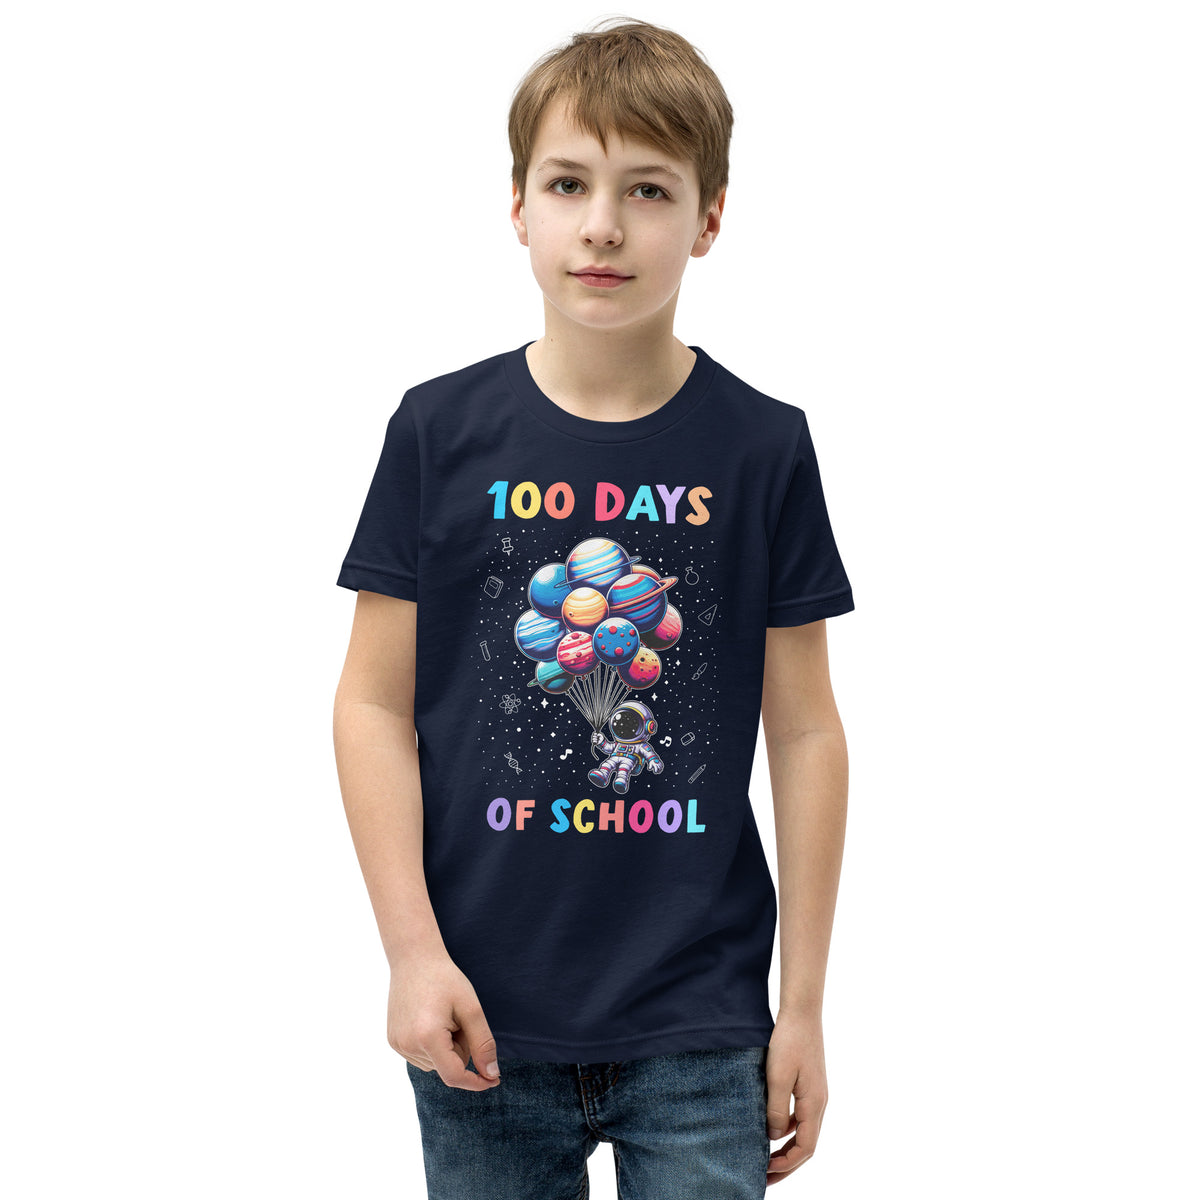 100 Days of School Astronaut Shirt, Celebrate with Happy 100th Day Tee, Student Back to School Gift for Space Lovers